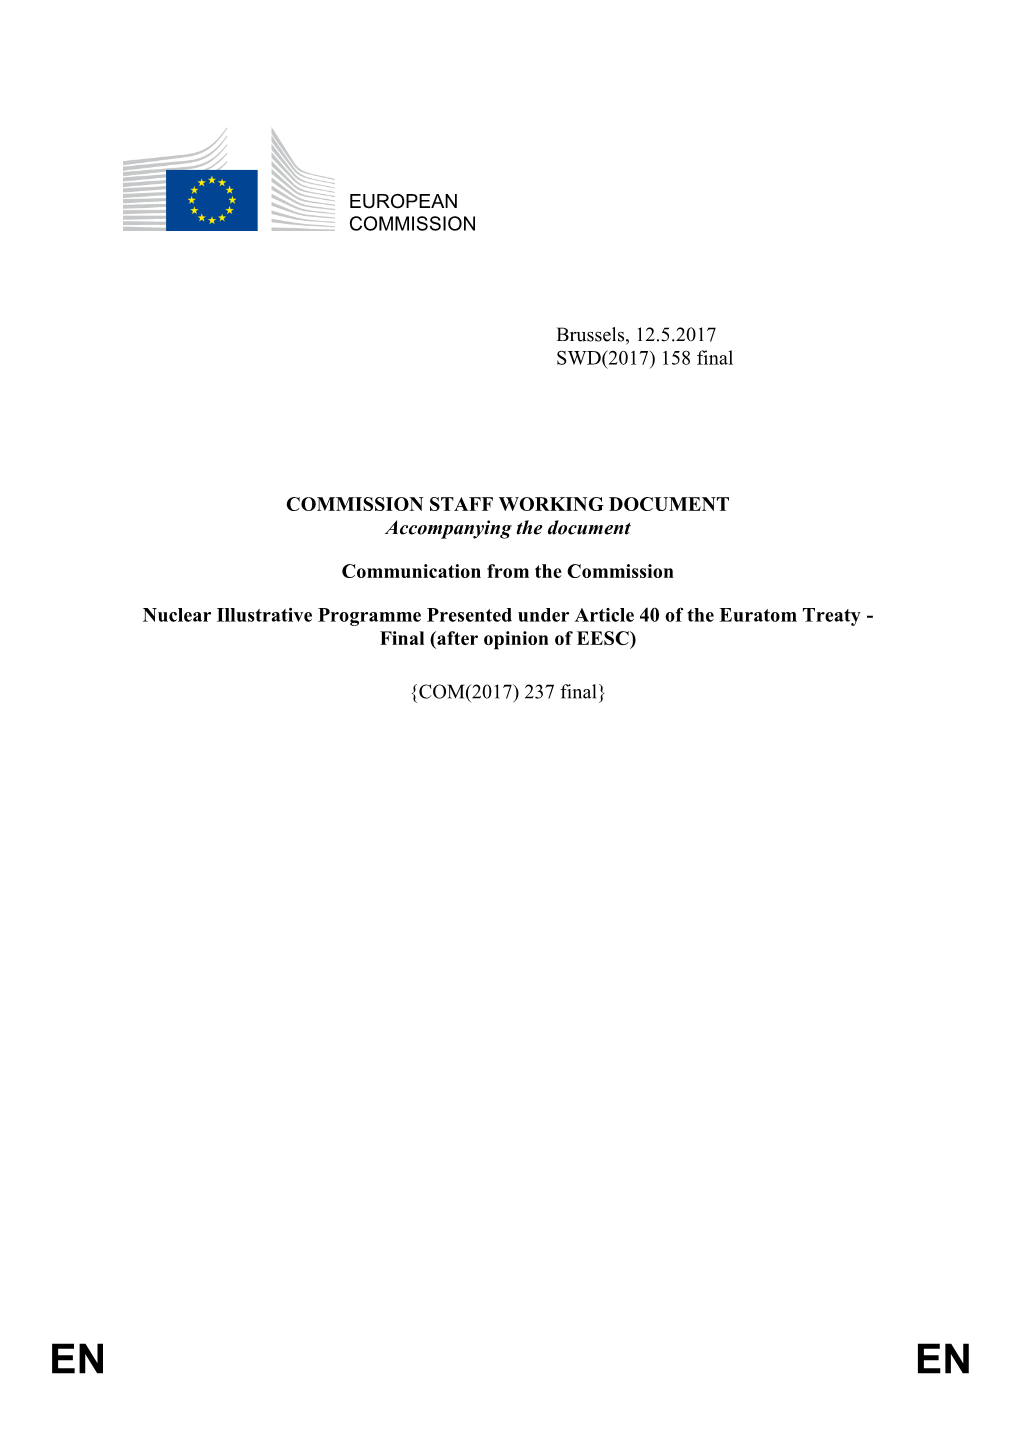 EUROPEAN COMMISSION Brussels, 12.5.2017 SWD(2017) 158 Final COMMISSION STAFF WORKING DOCUMENT Accompanying the Document Communi